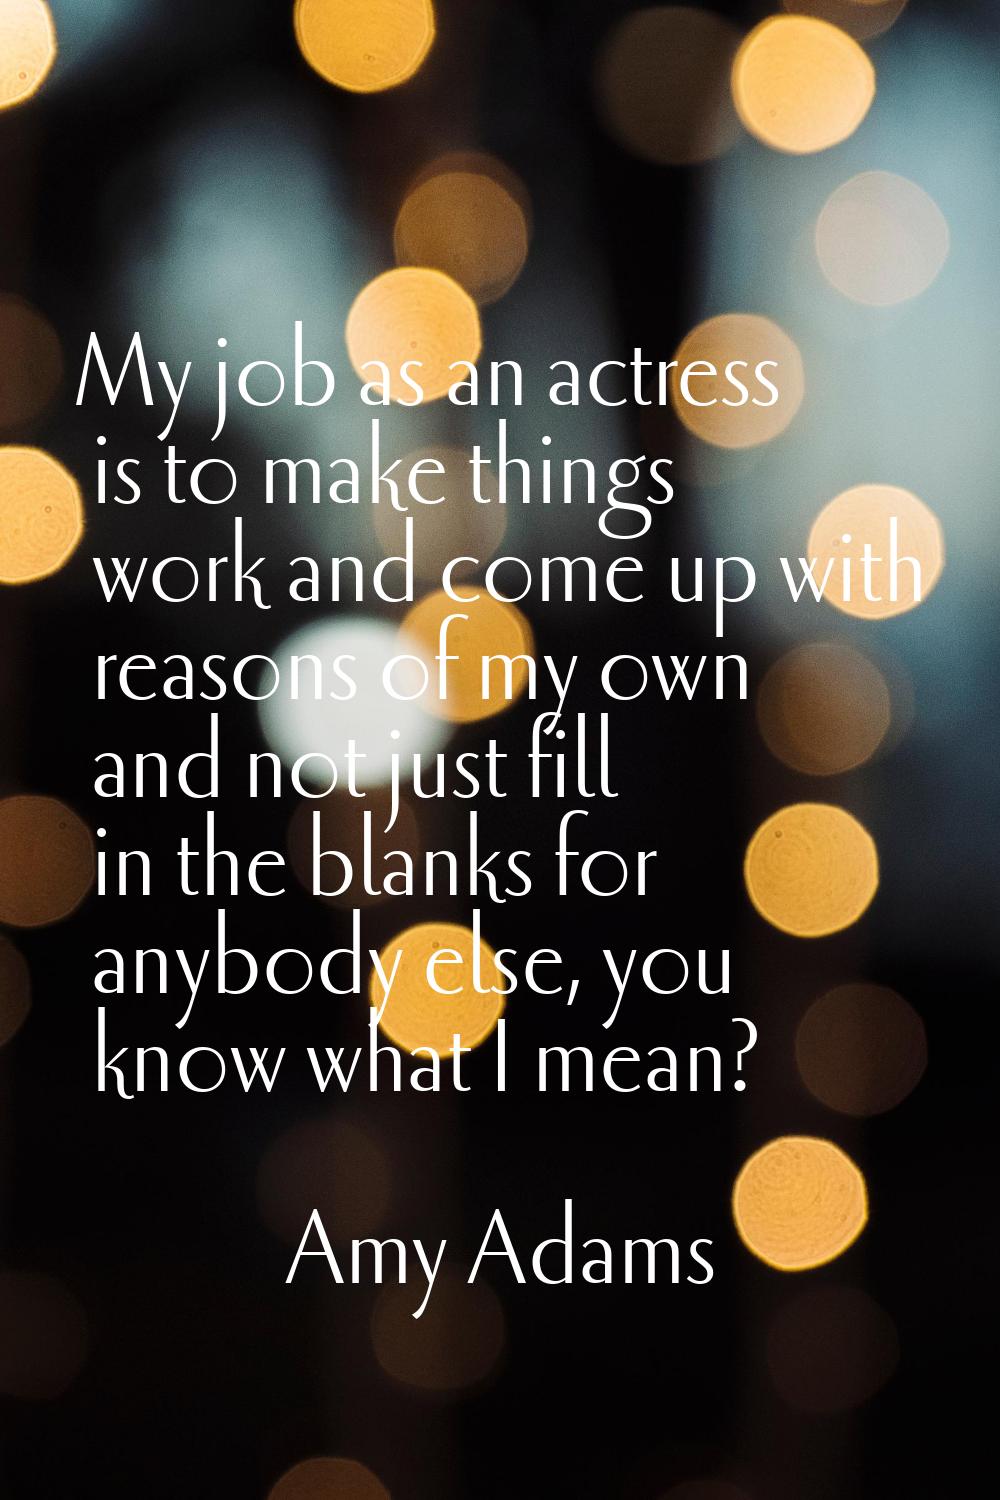 My job as an actress is to make things work and come up with reasons of my own and not just fill in